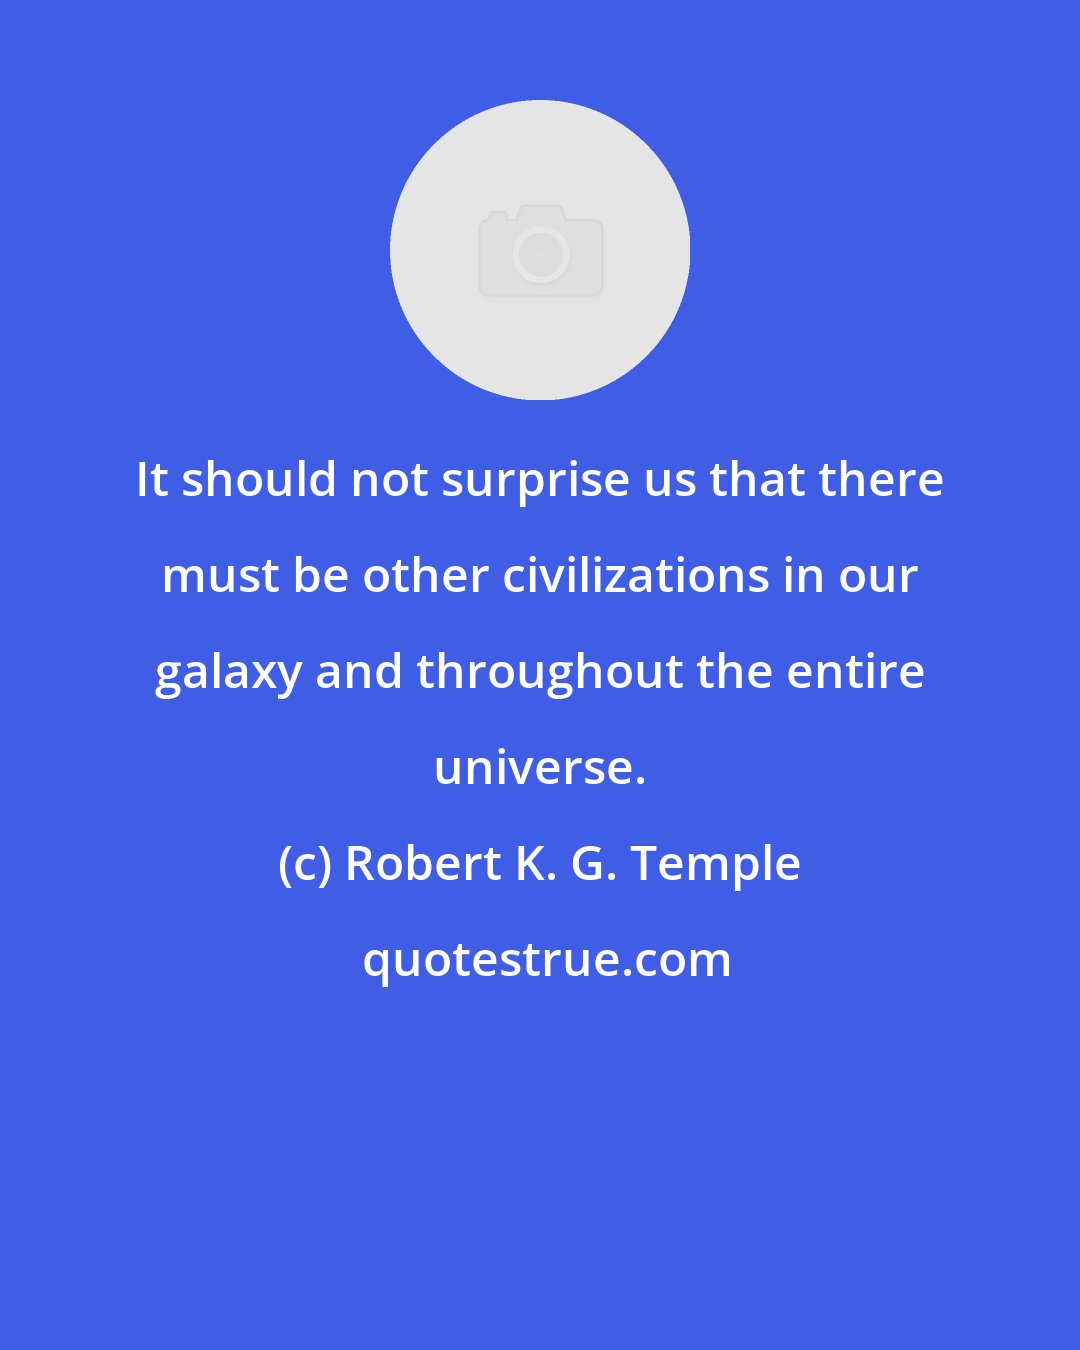 Robert K. G. Temple: It should not surprise us that there must be other civilizations in our galaxy and throughout the entire universe.